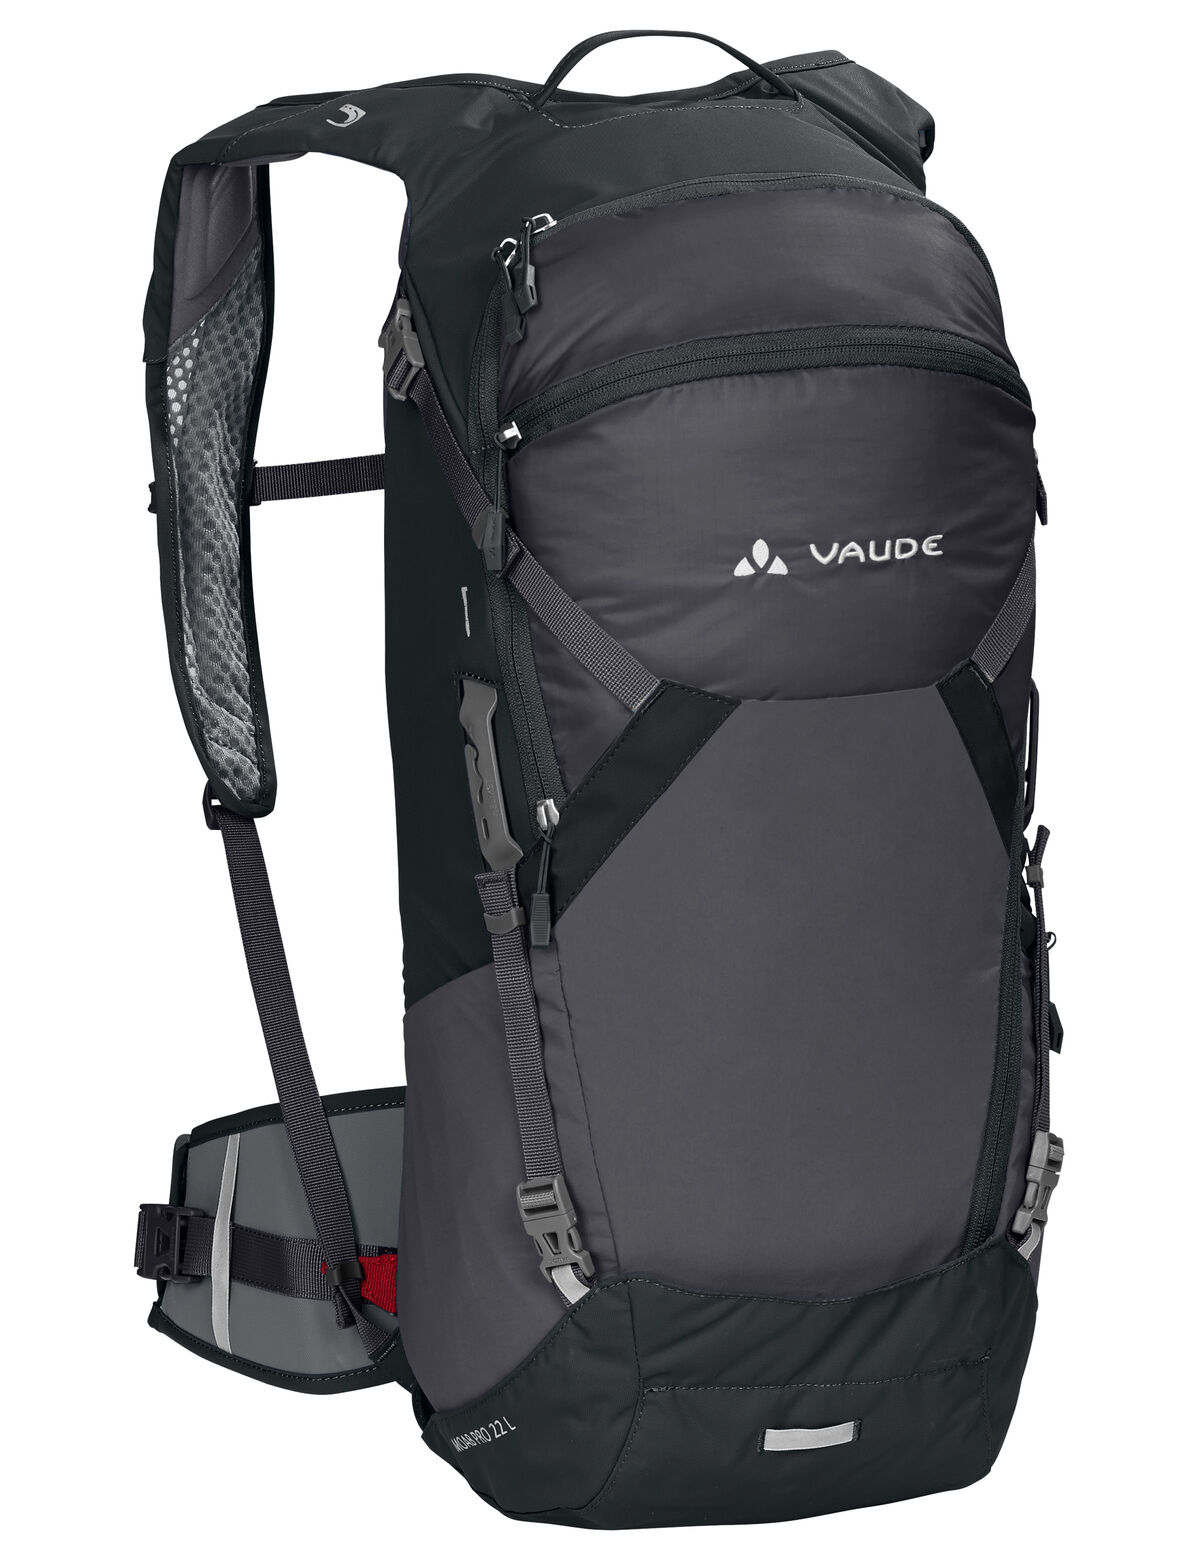 Vaude - Moab Pro 22 L - Cycling backpack